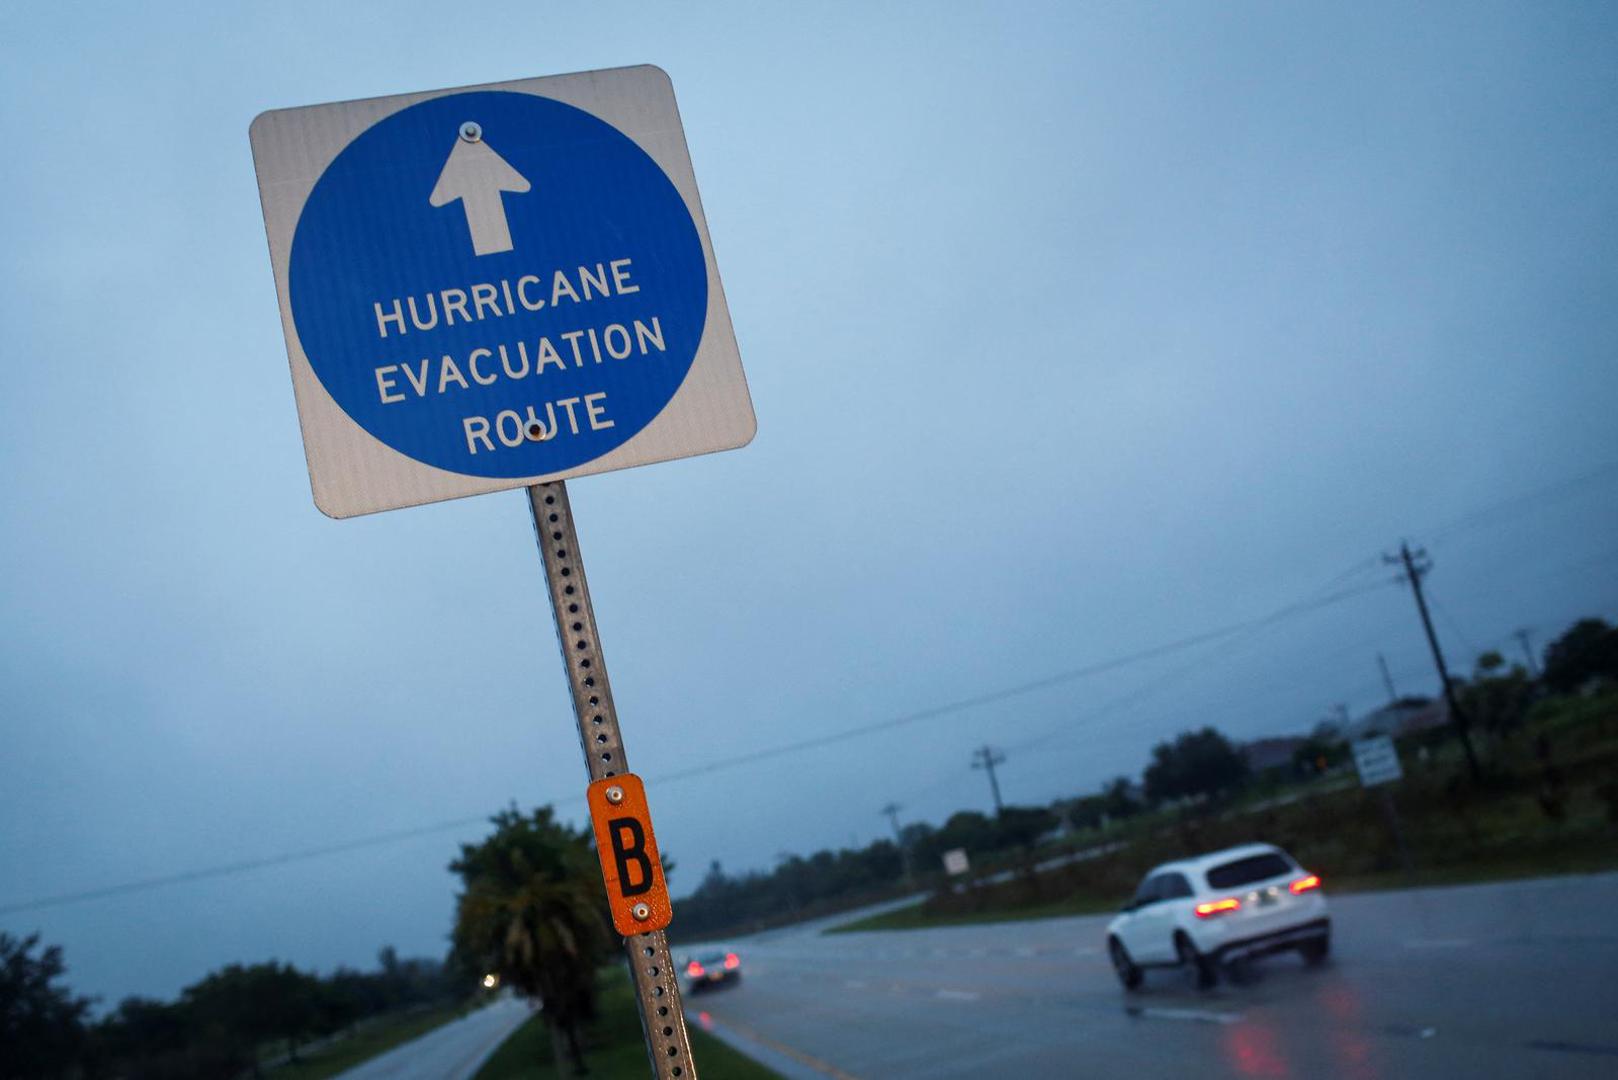 A hurricane evacuation route sign is displayed as Hurricane Ian spins toward the state carrying high winds, torrential rains and a powerful storm surge, in Punta Gorda, Florida, U.S. September 27, 2022. REUTERS/Marco Bello Photo: MARCO BELLO/REUTERS